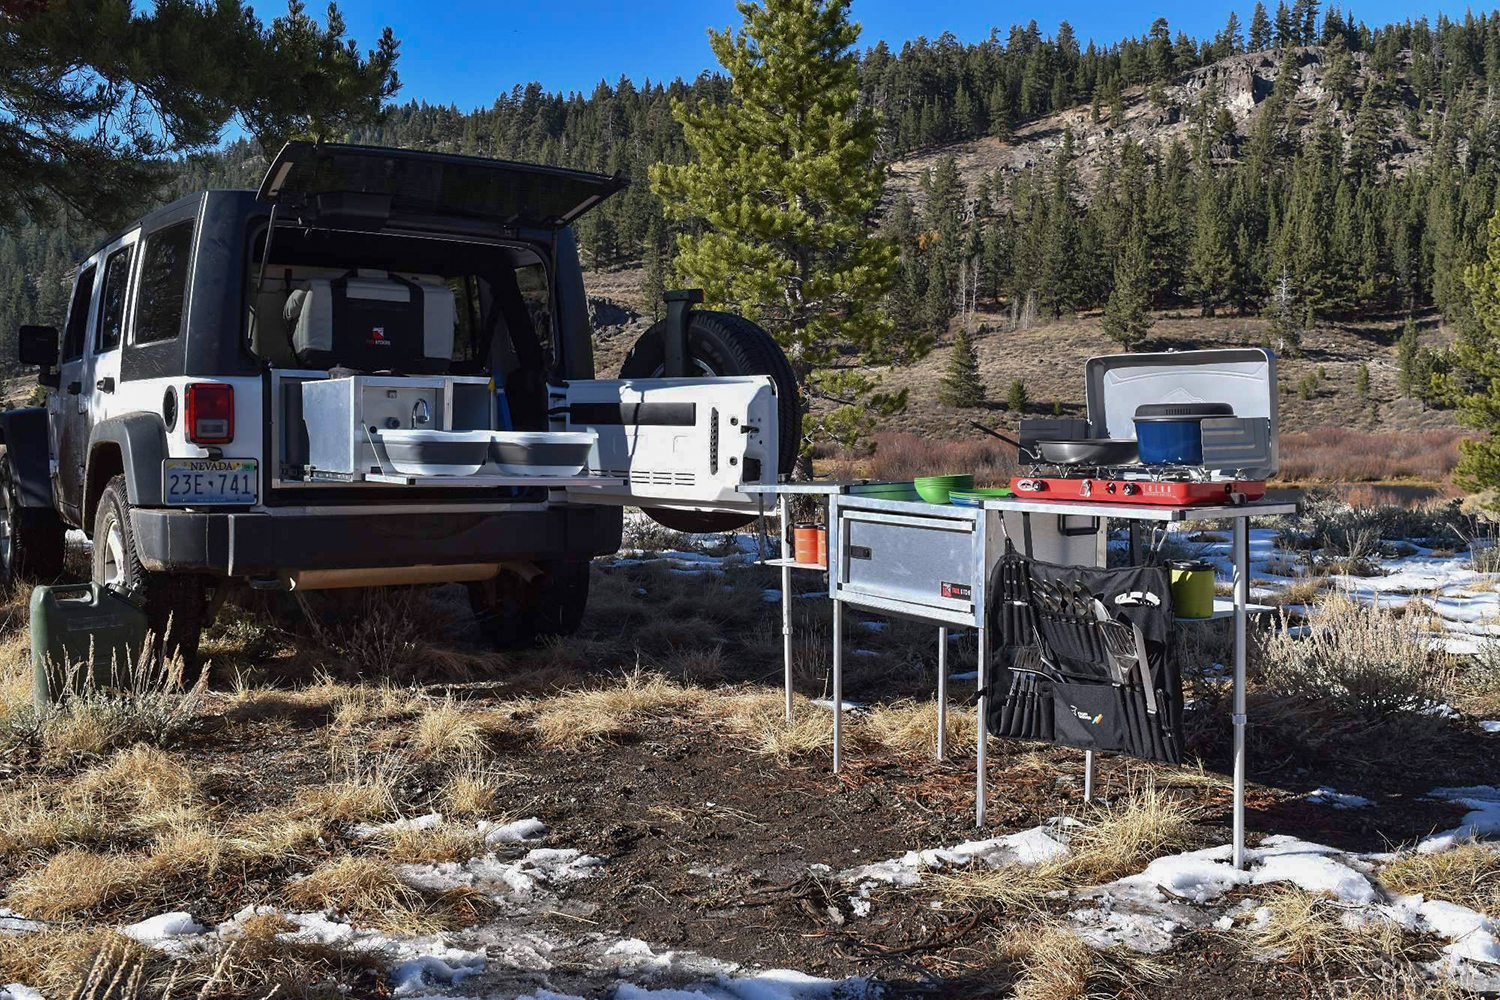 The Wrangler Camping System